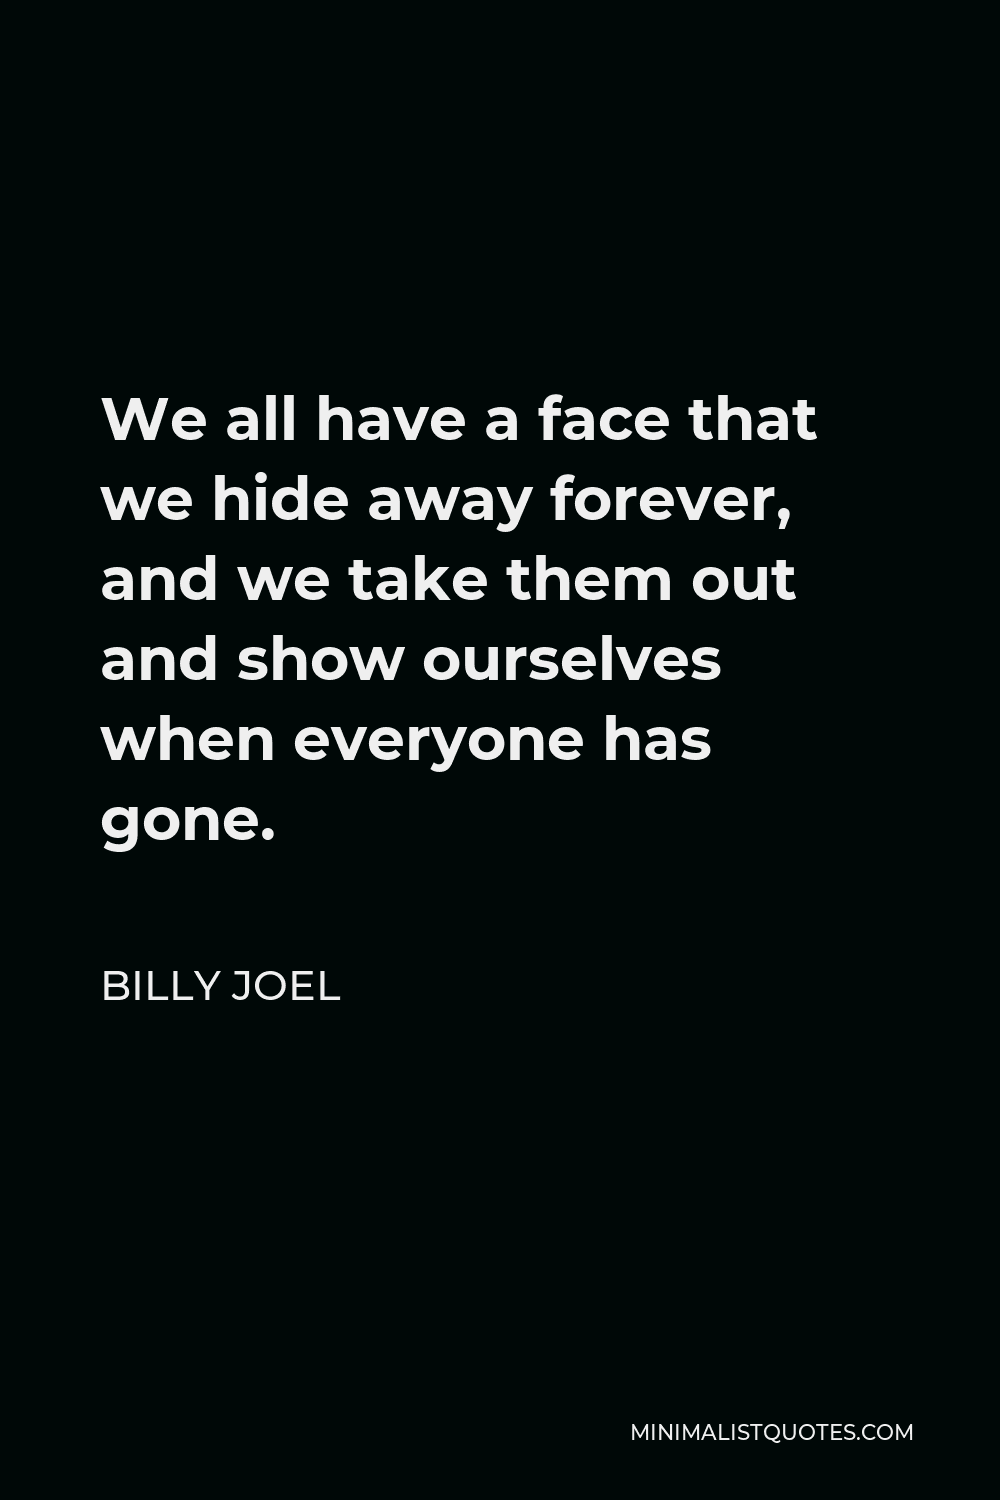 Billy Joel Quote - We all have a face that we hide away forever, and we take them out and show ourselves when everyone has gone.